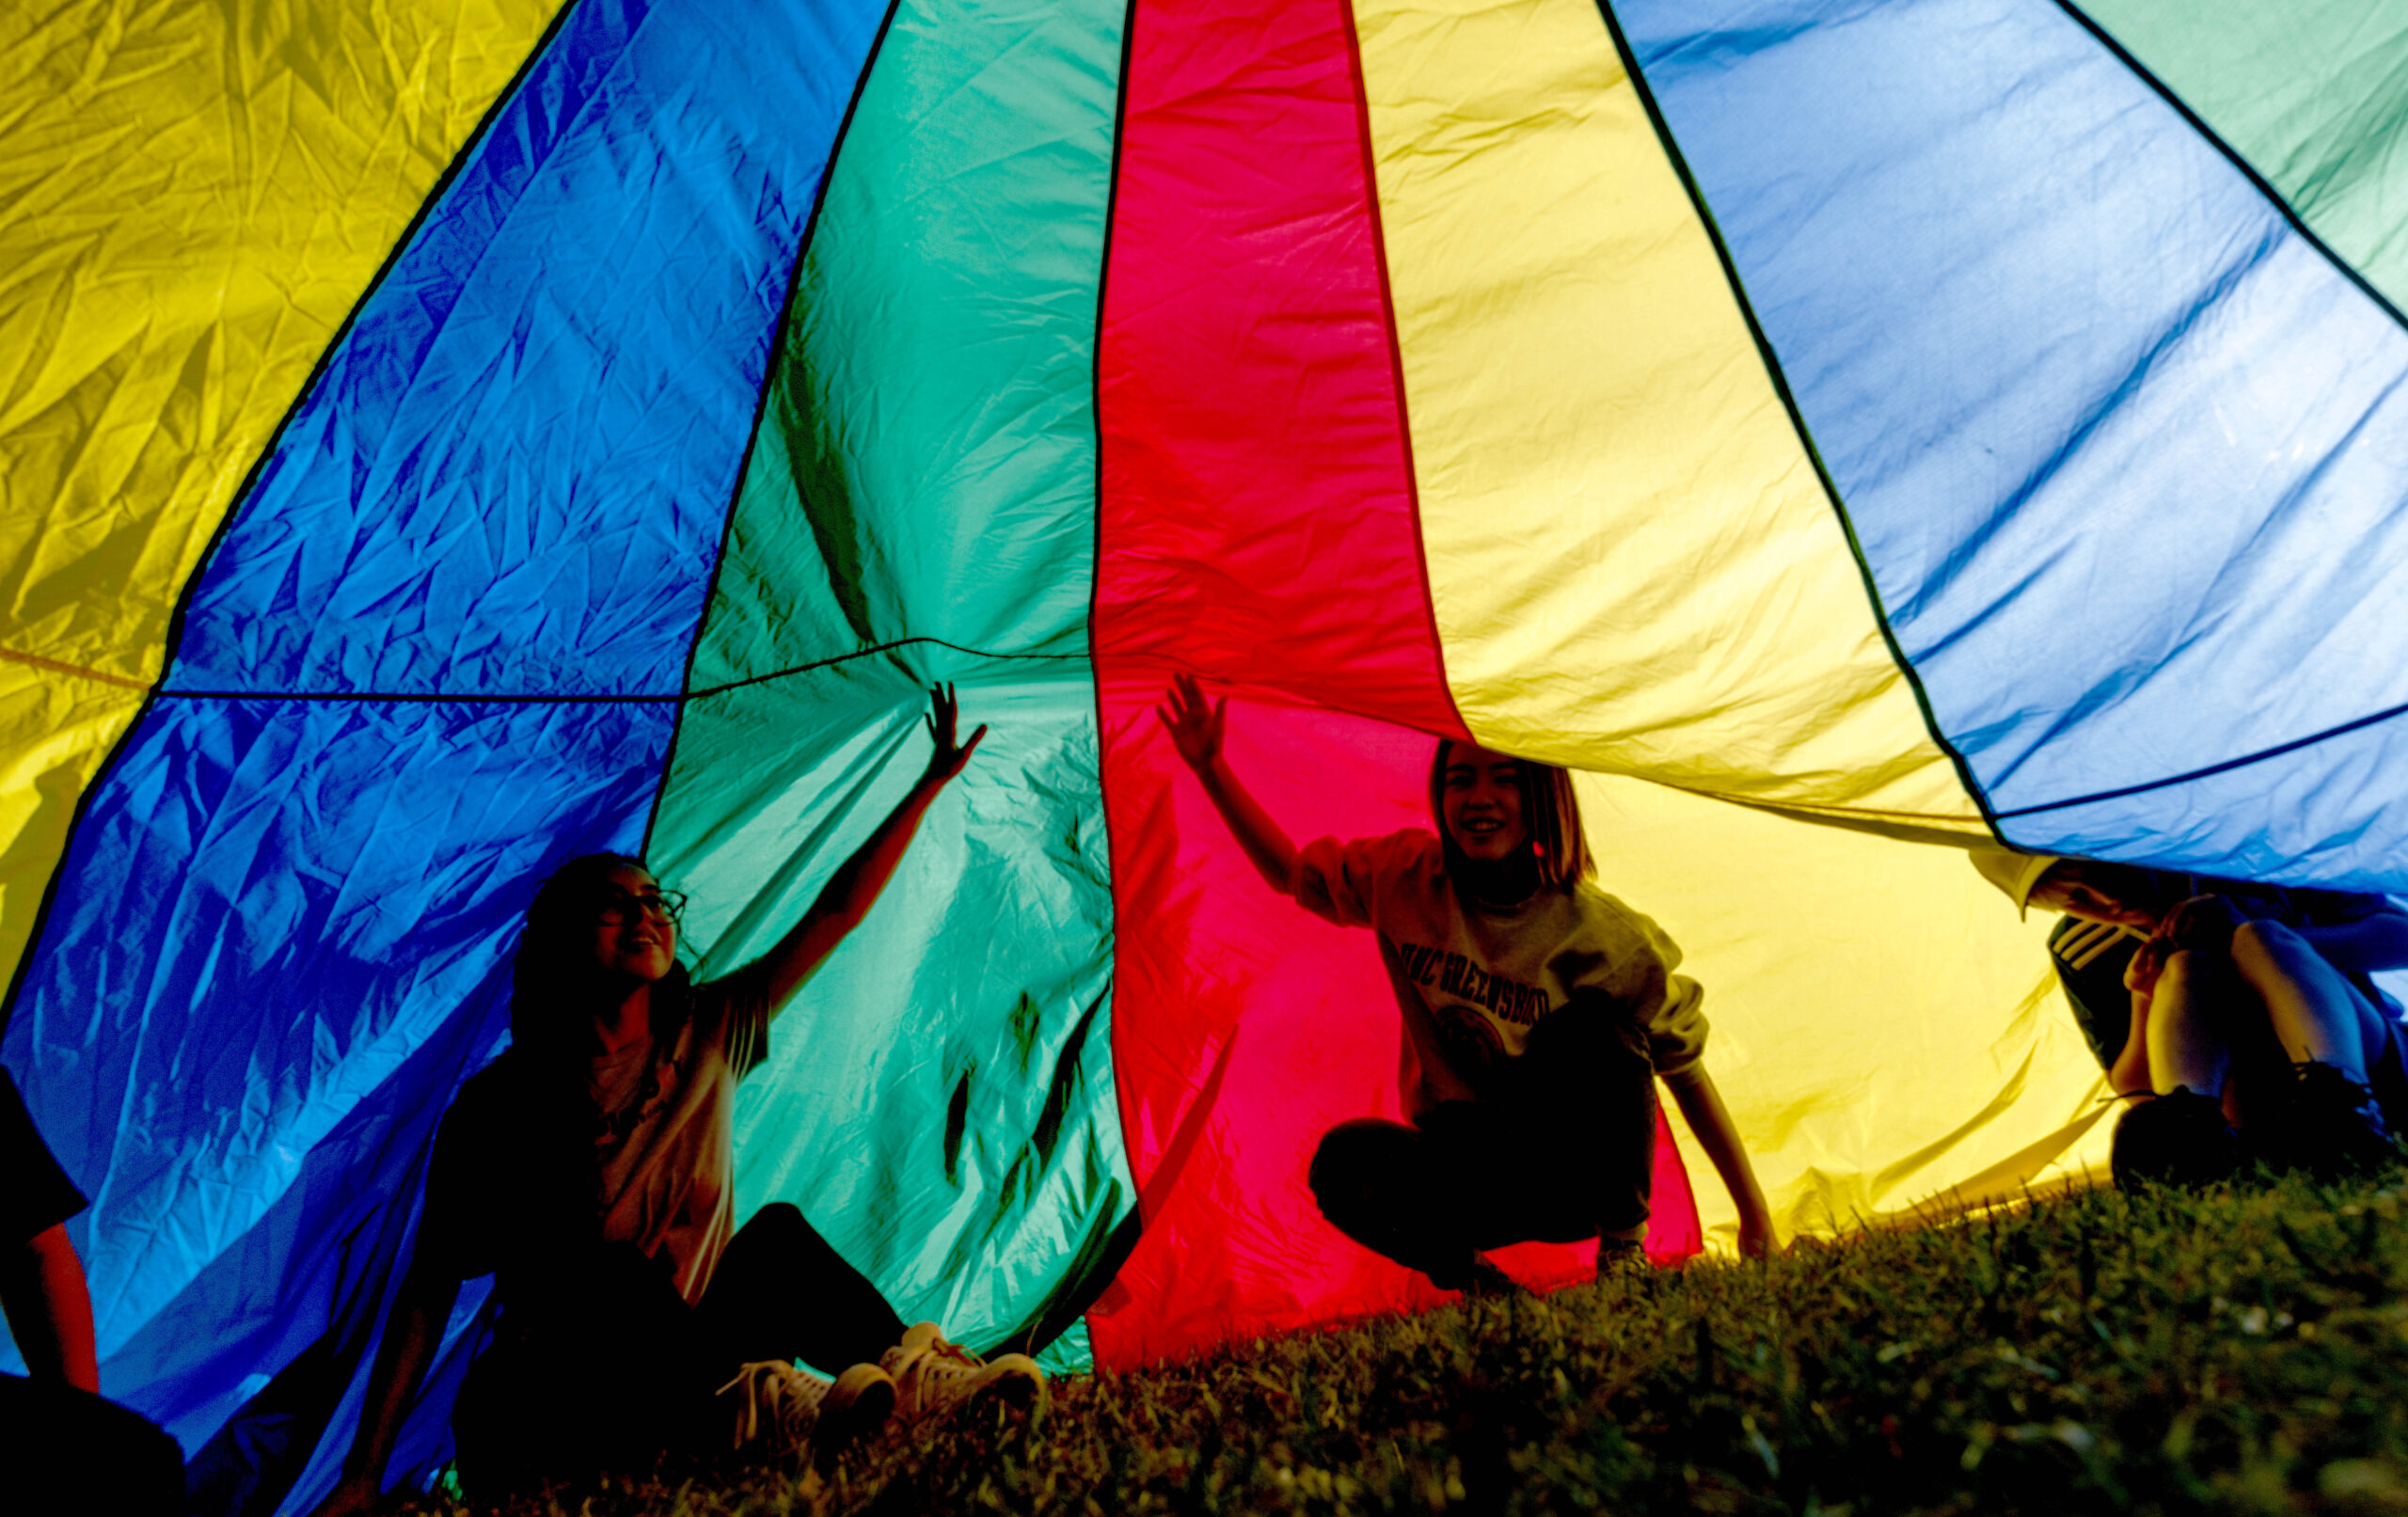 Children play under a colorful parachute.